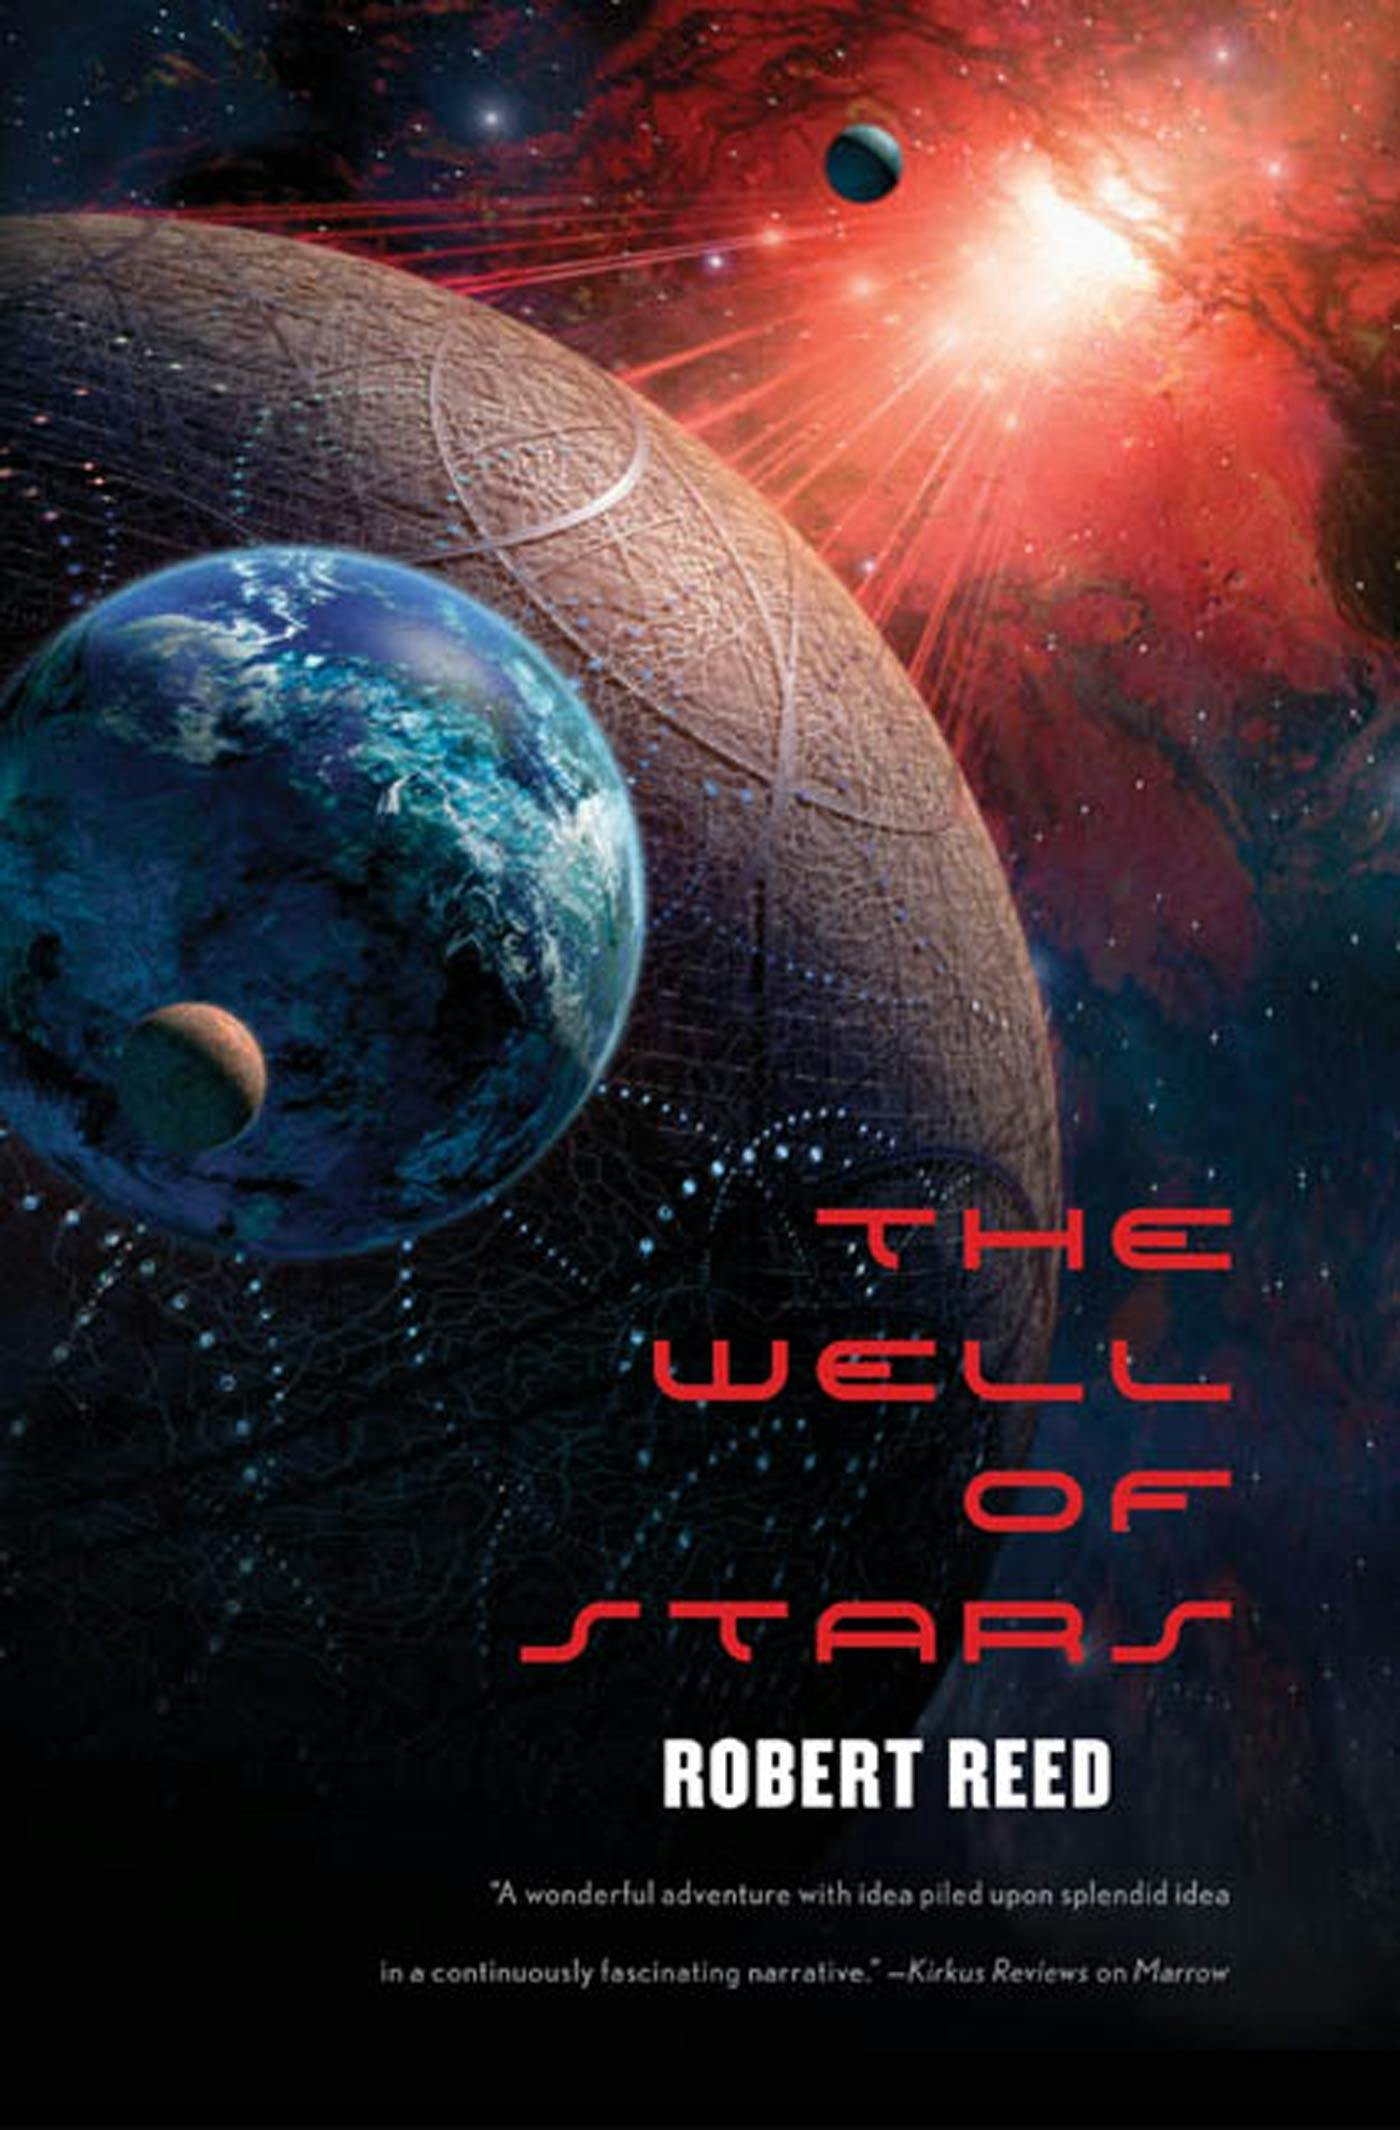 Cover for the book titled as: The Well of Stars